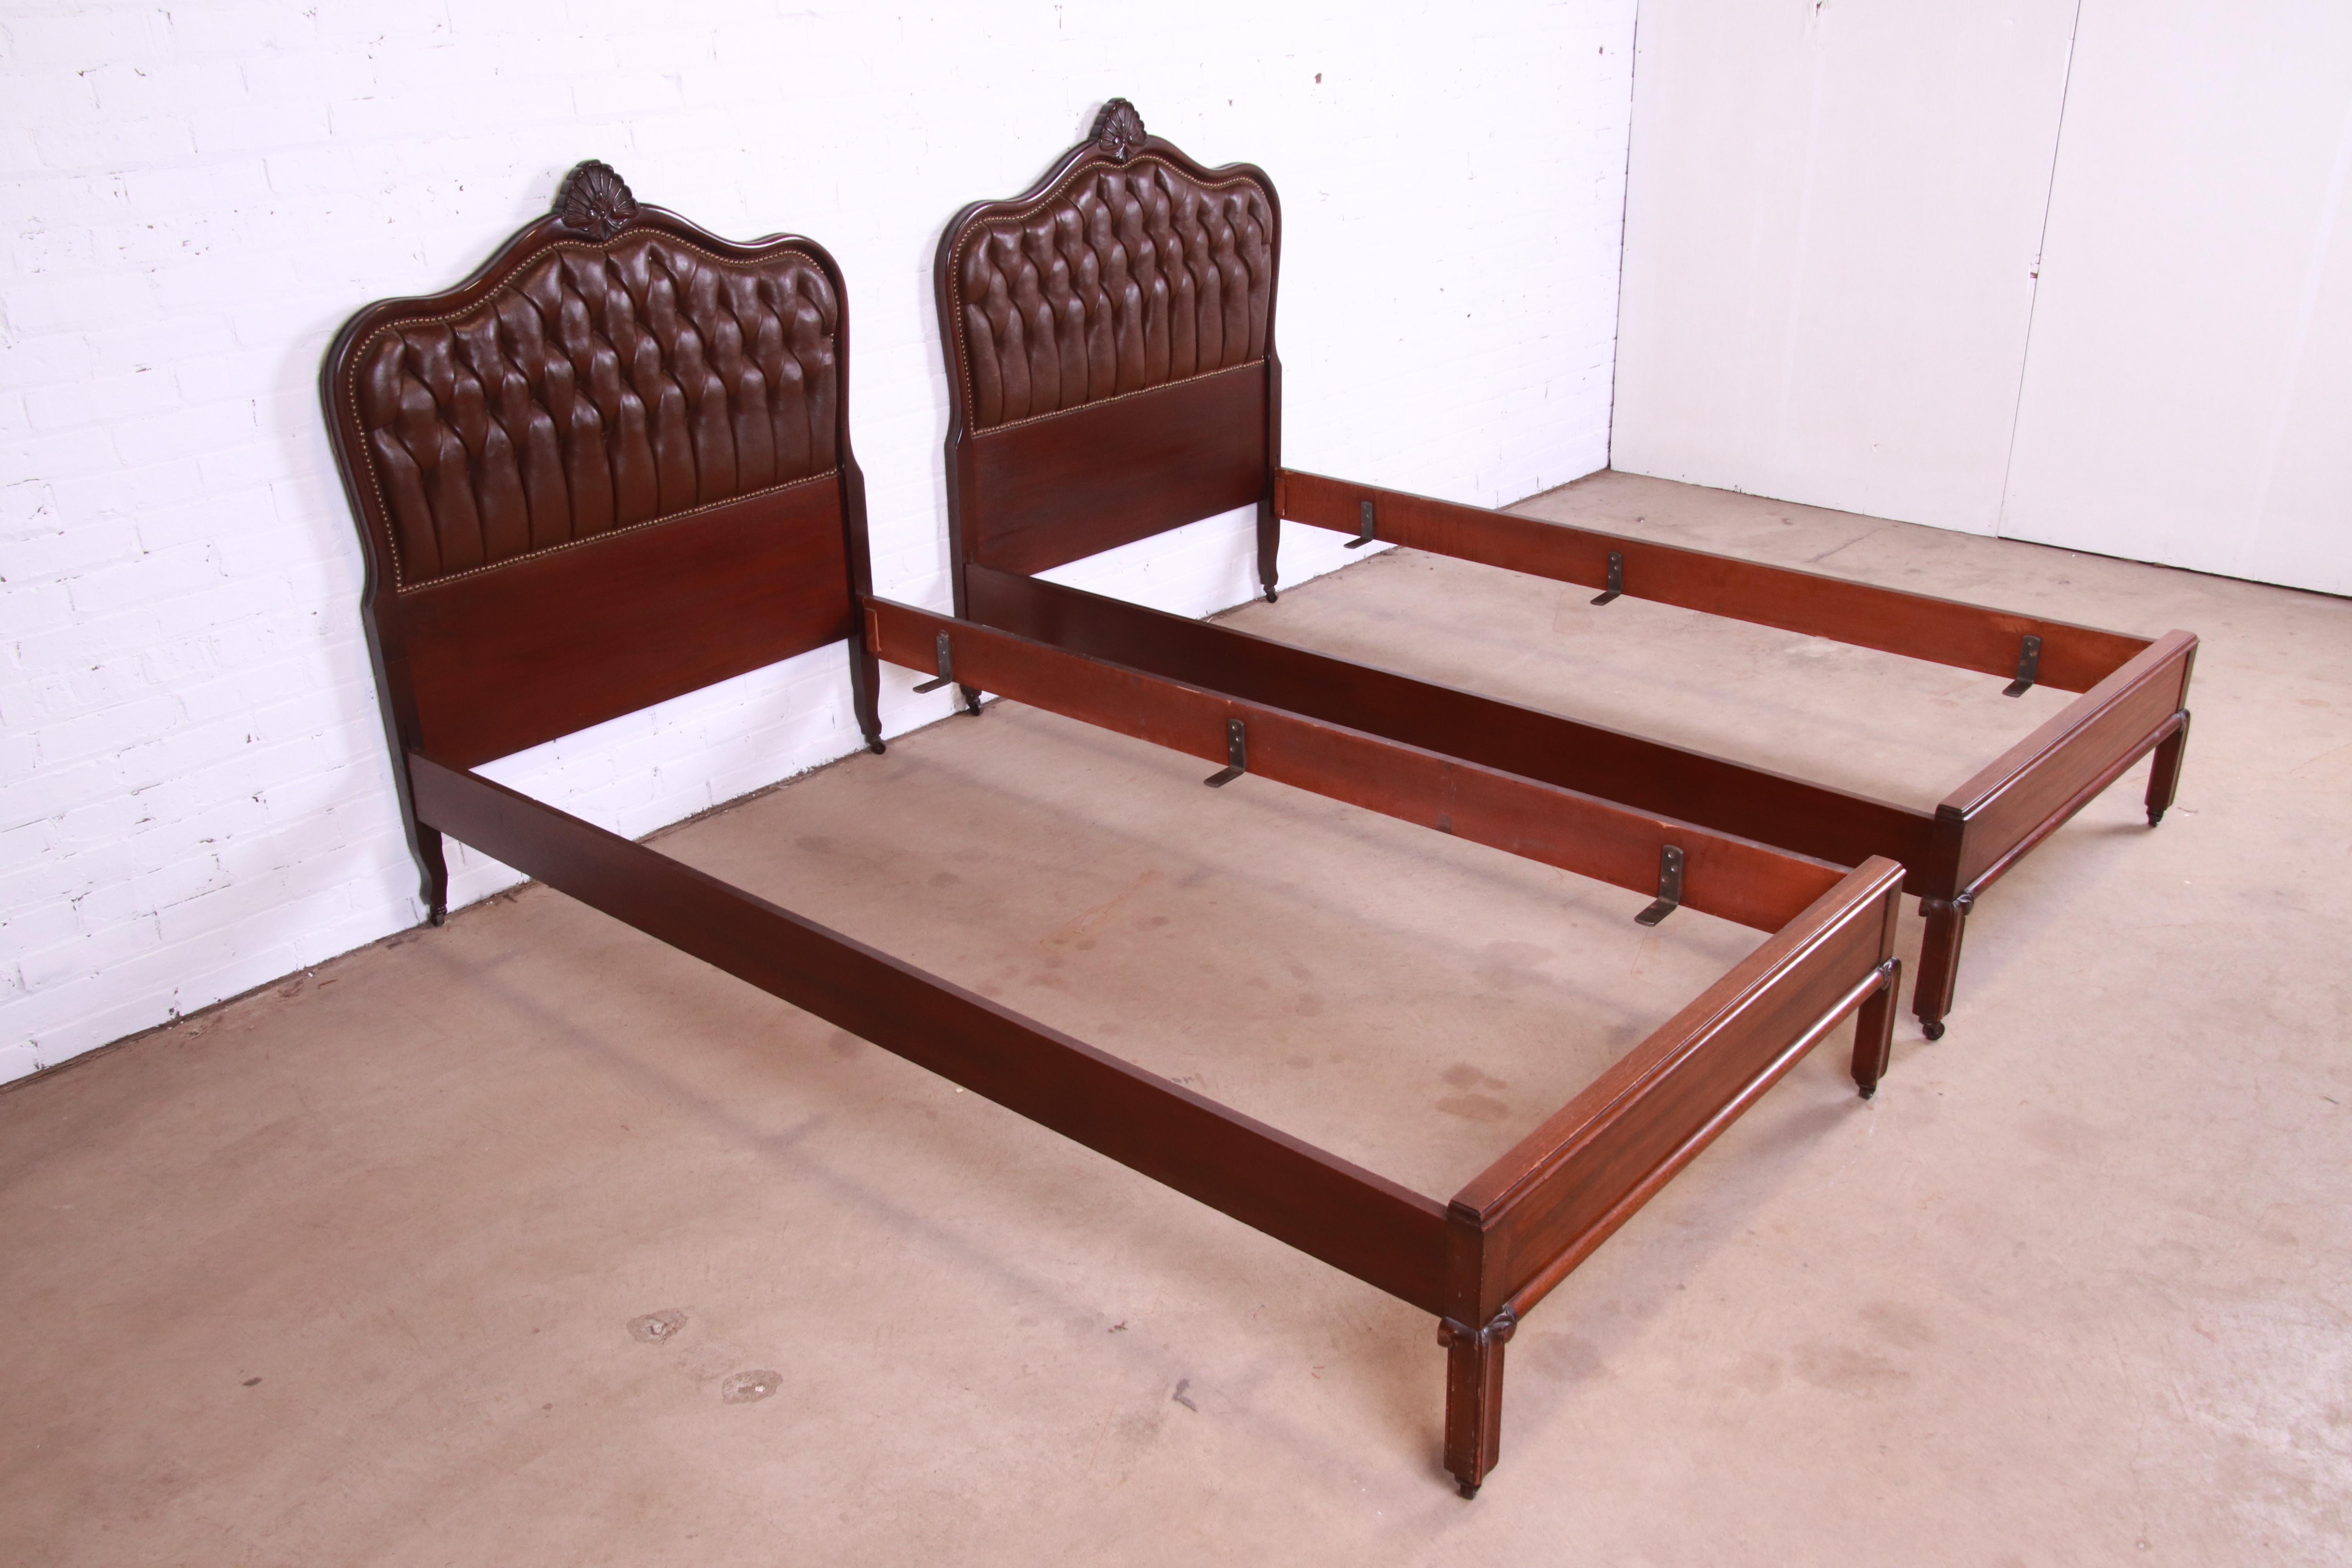 French Provincial Louis XV Mahogany and Tufted Leather Twin Beds, Pair In Good Condition For Sale In South Bend, IN